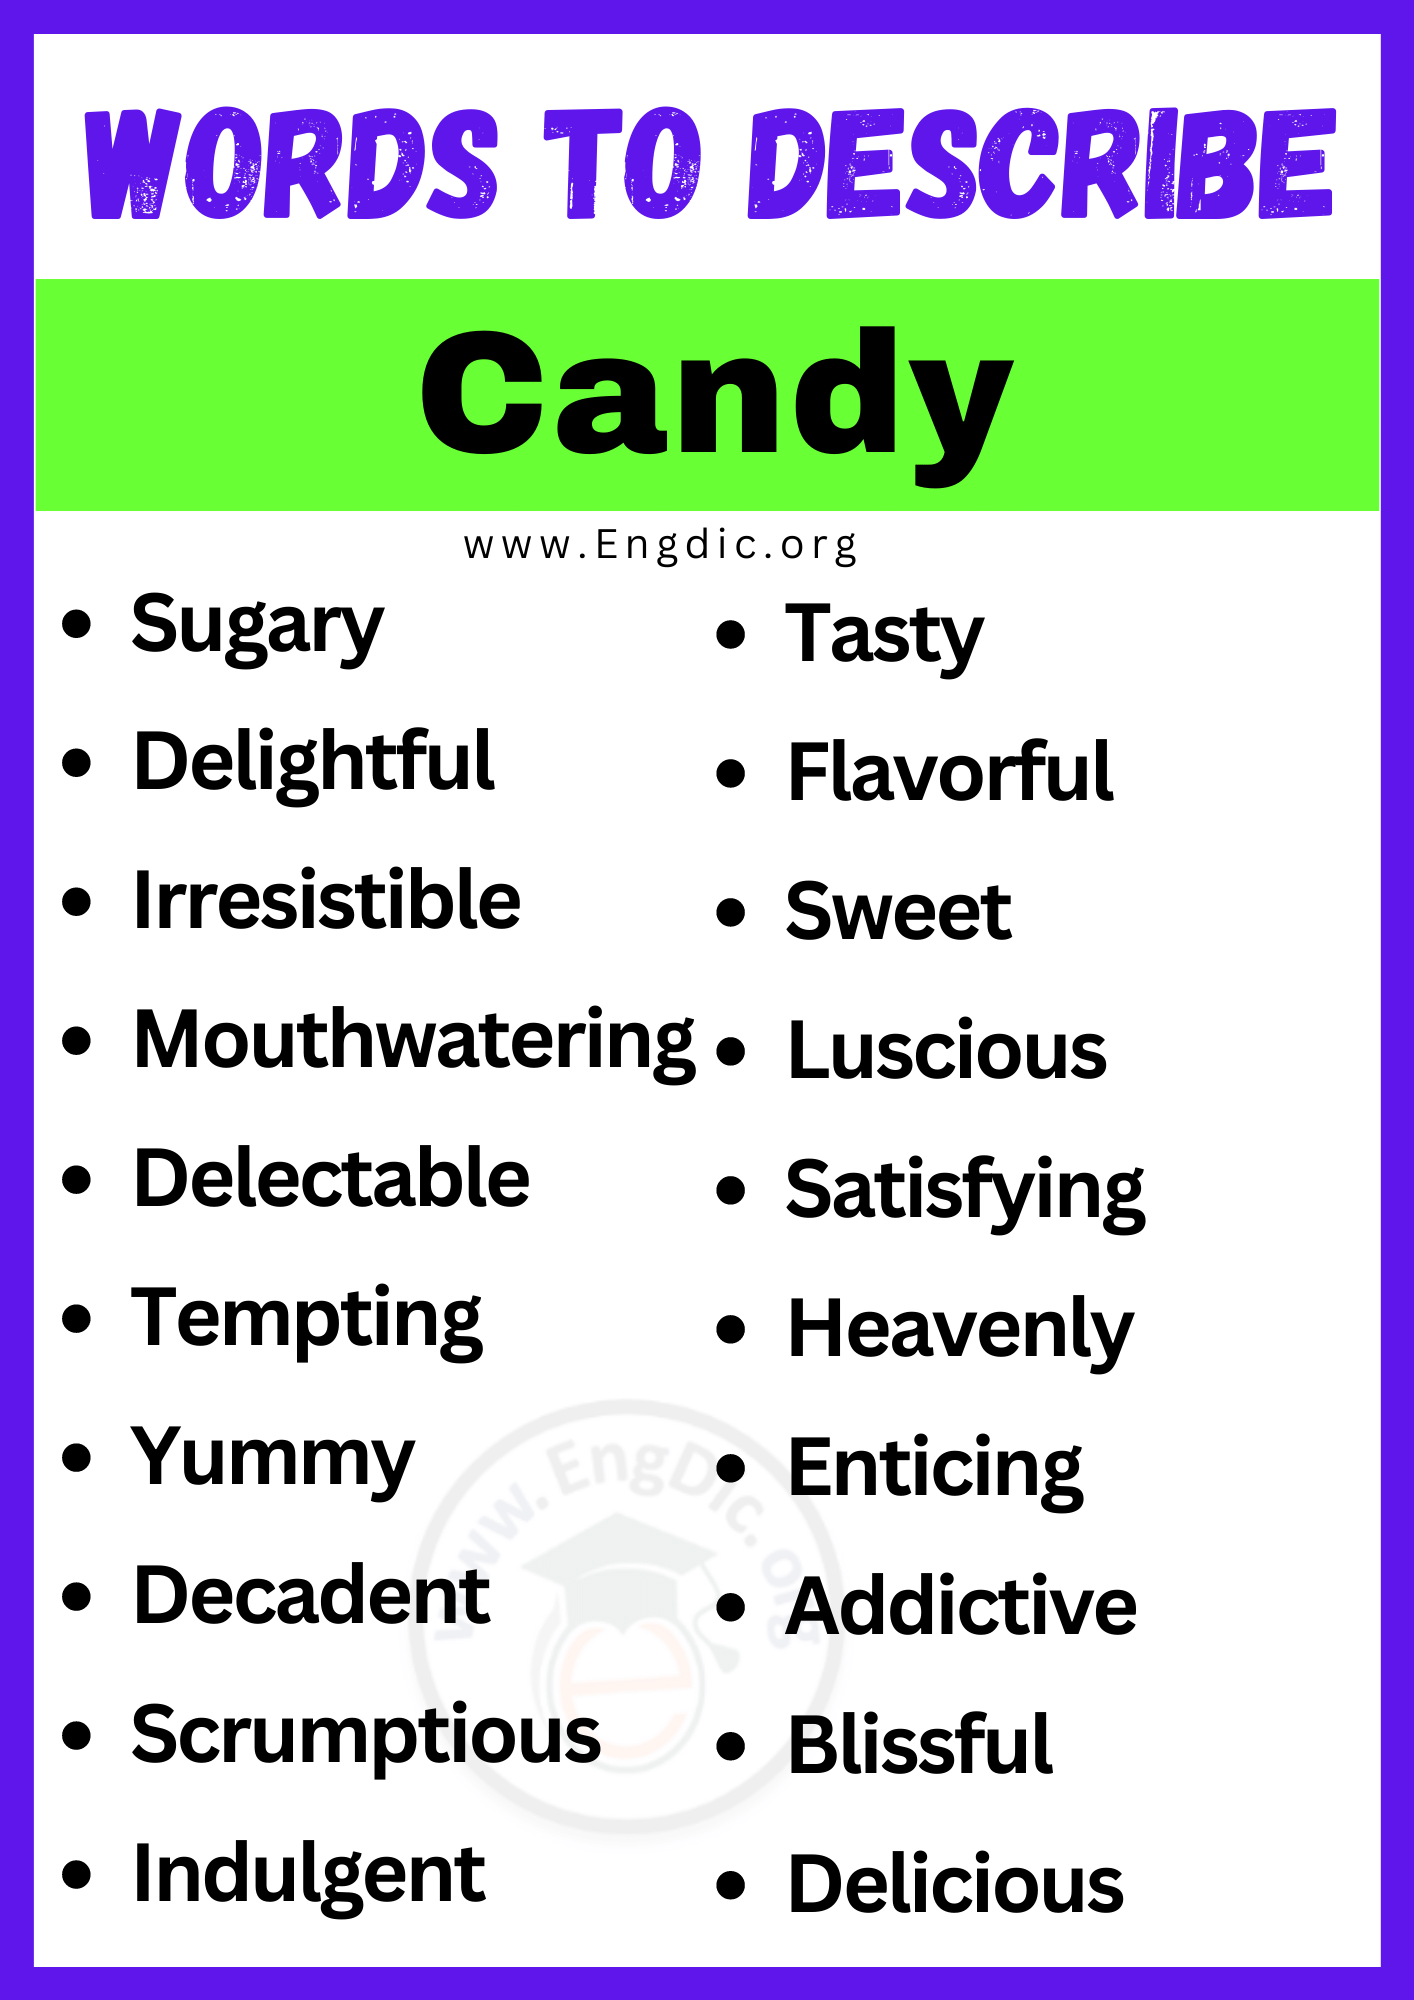 Words to Describe Candy